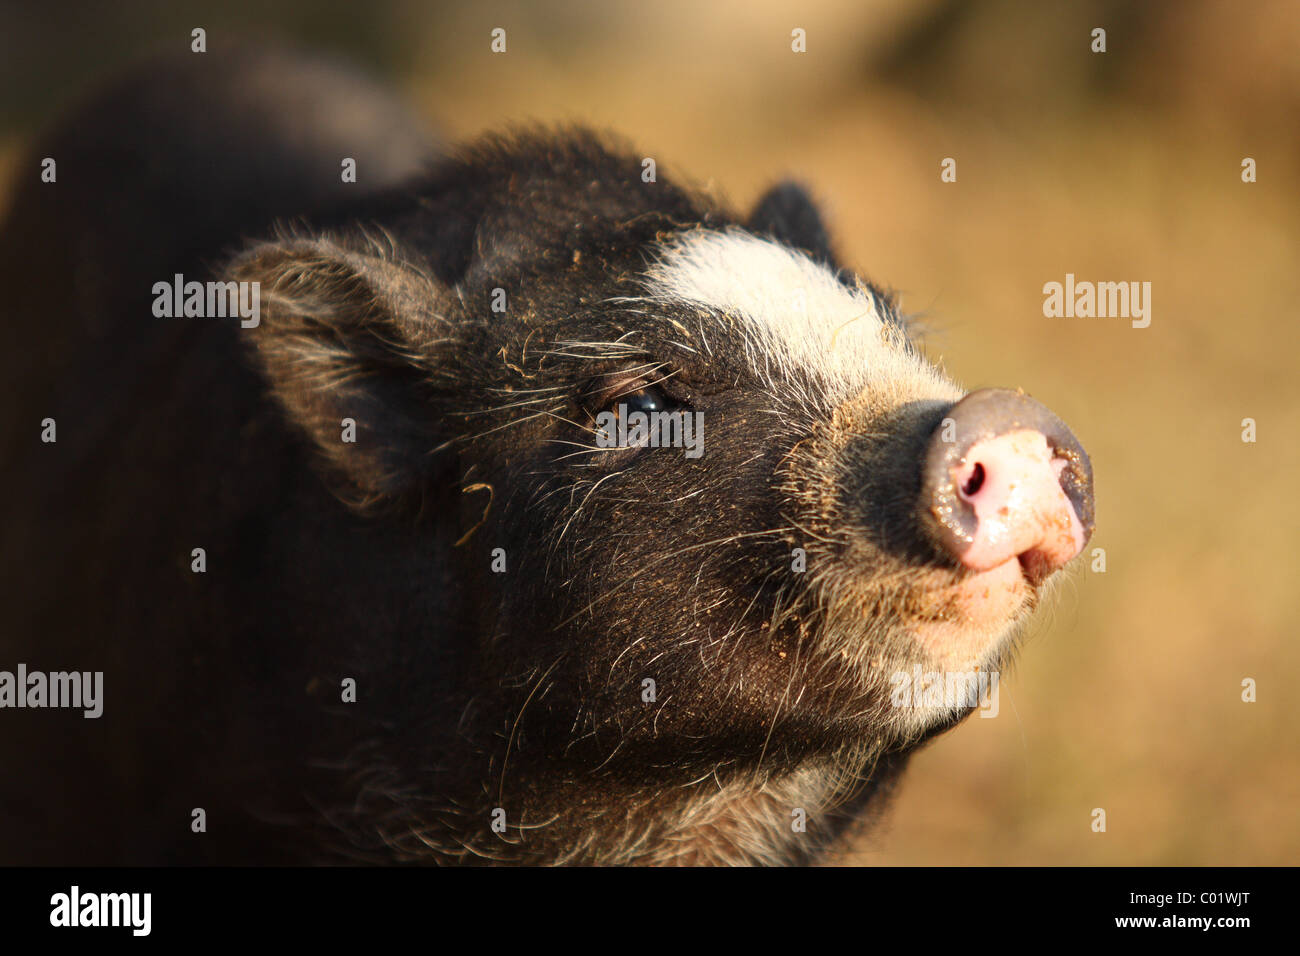 pot-bellied pig Stock Photo